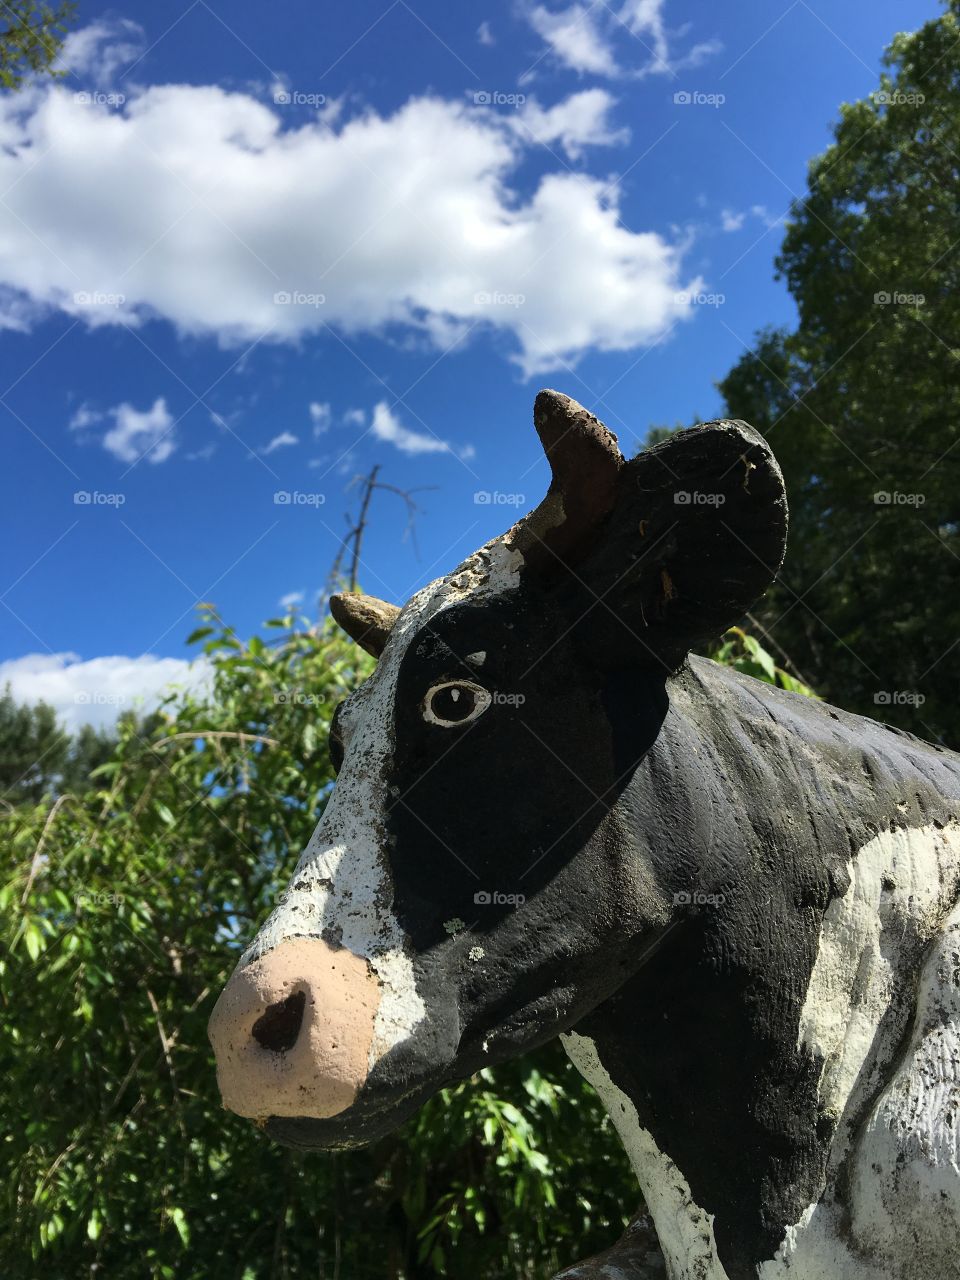 Cement cow against greenery & blue sky!🐄